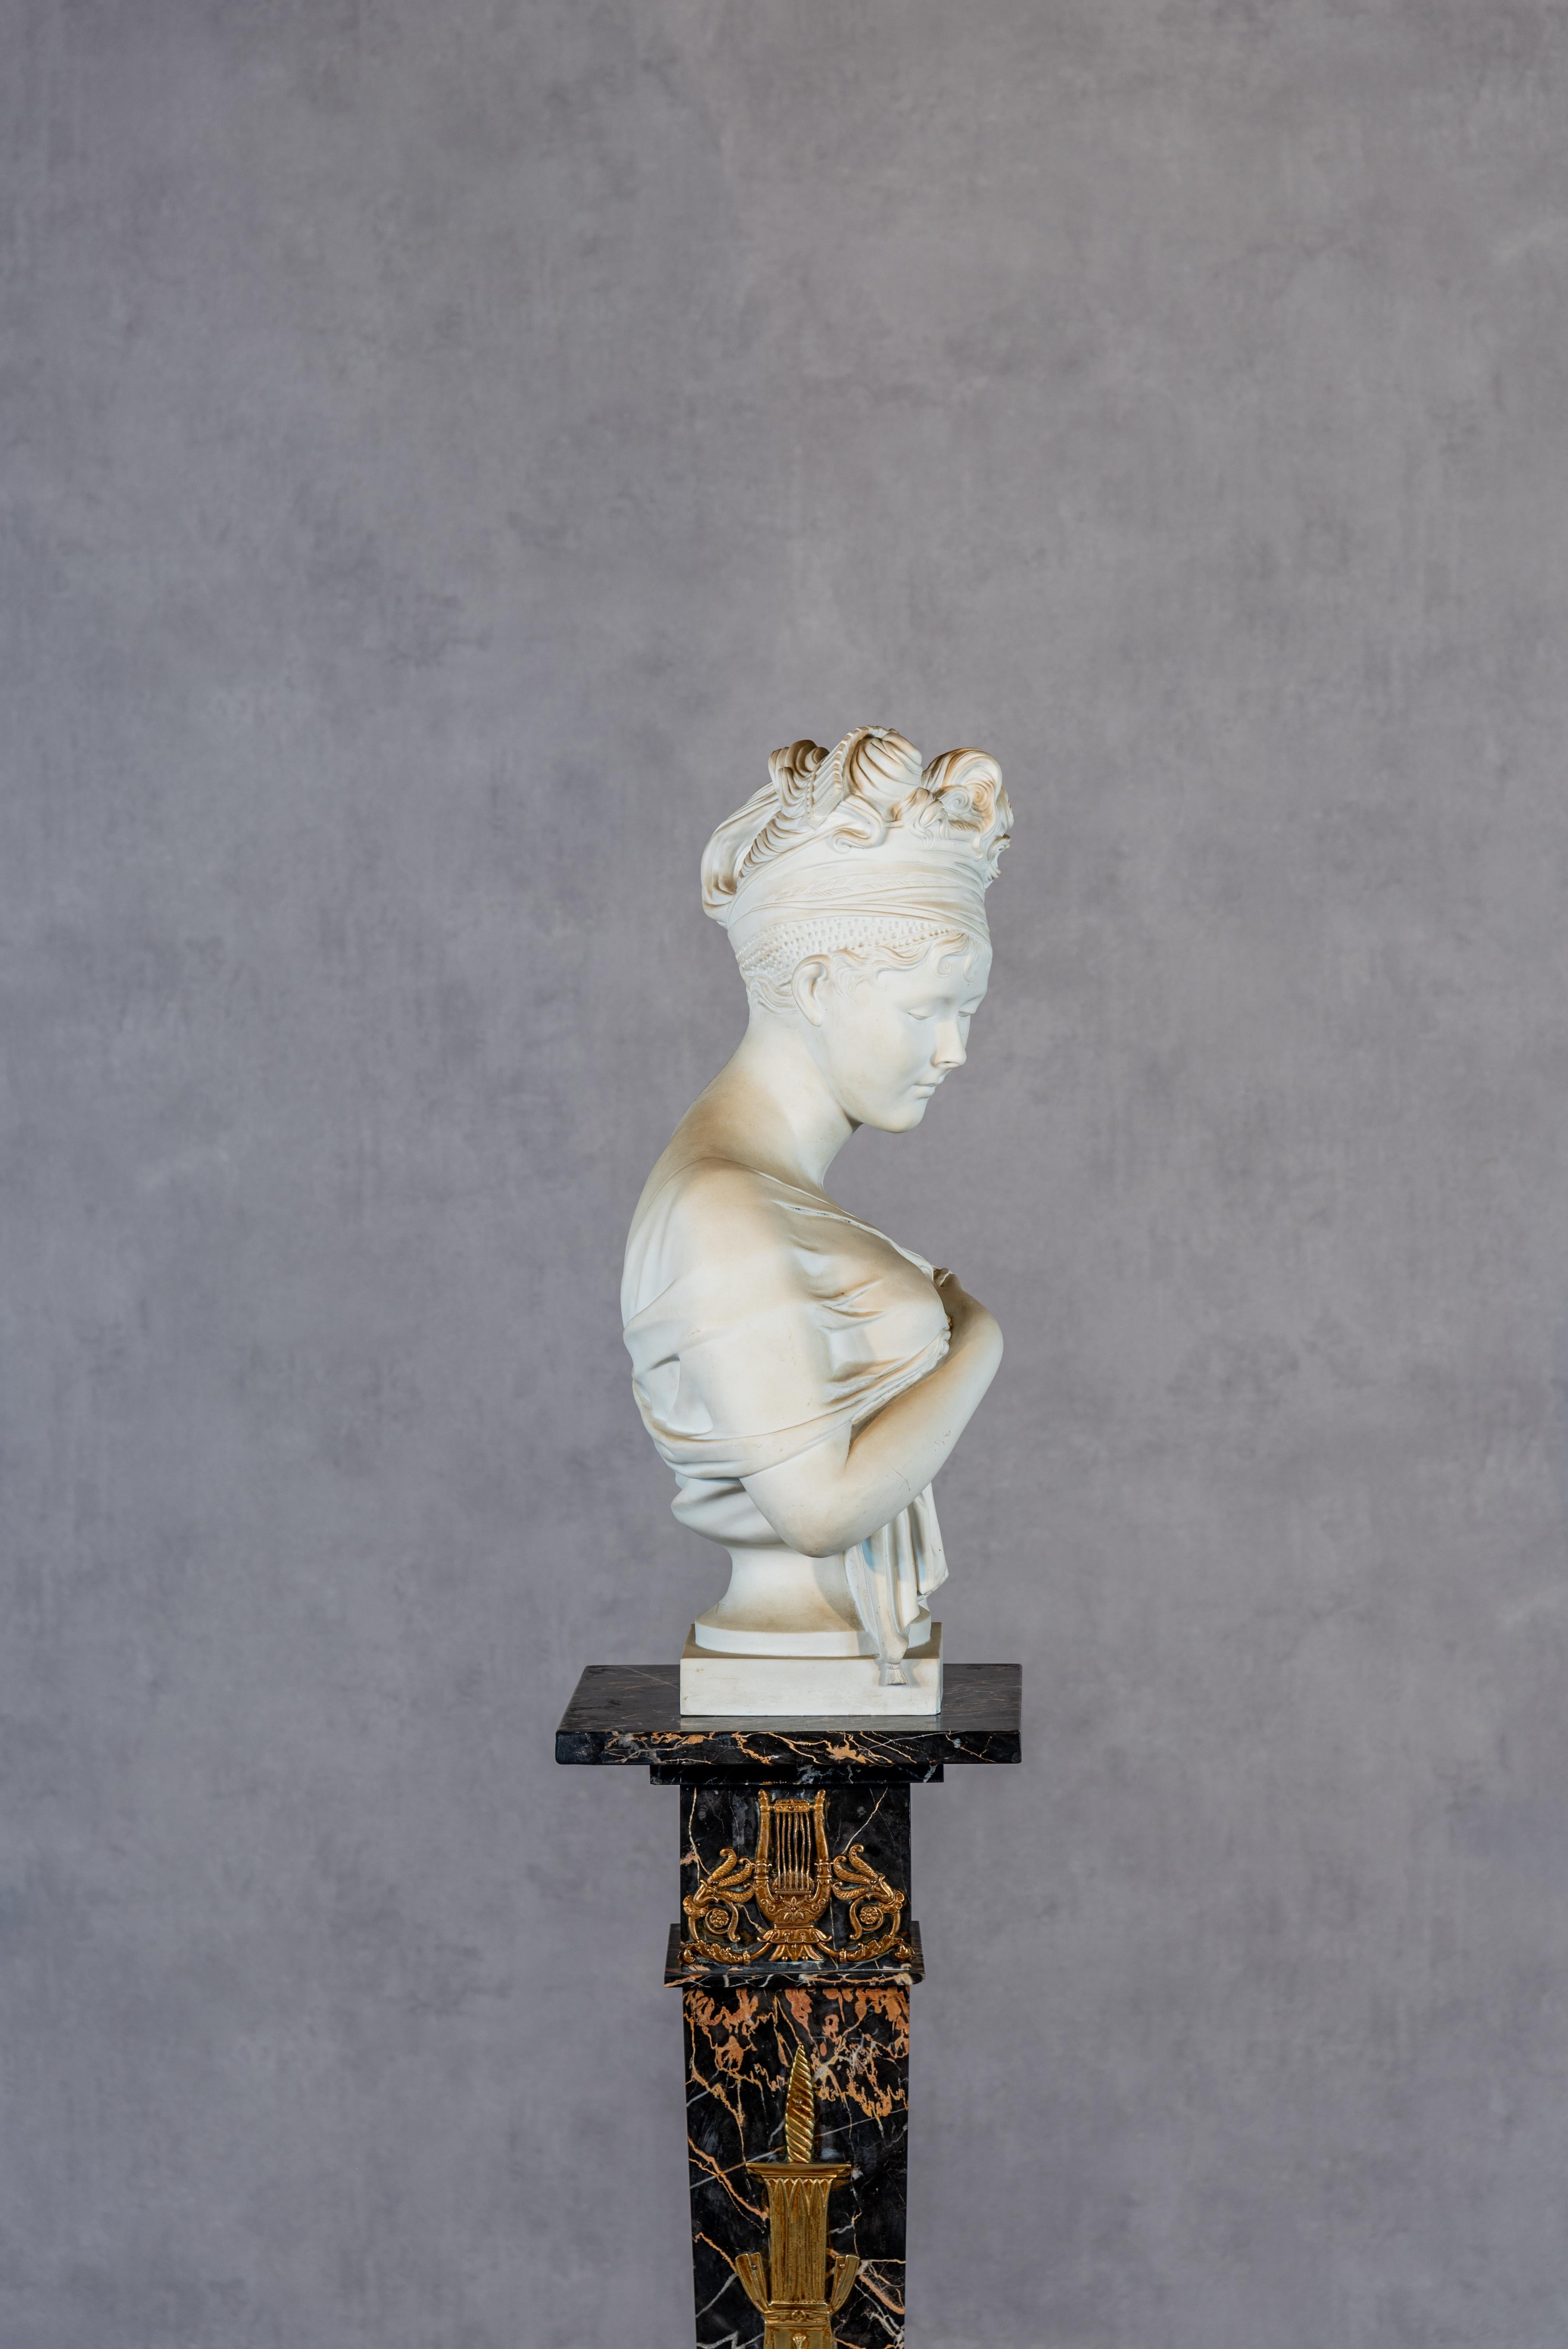 Discover the timeless beauty of this exquisite French Faience Bust of Madame Recamier, a tribute to the renowned sculptor Jean-Antoine Houdon. Made of authentic Sèvres faience, this piece is a testament to the traditional 